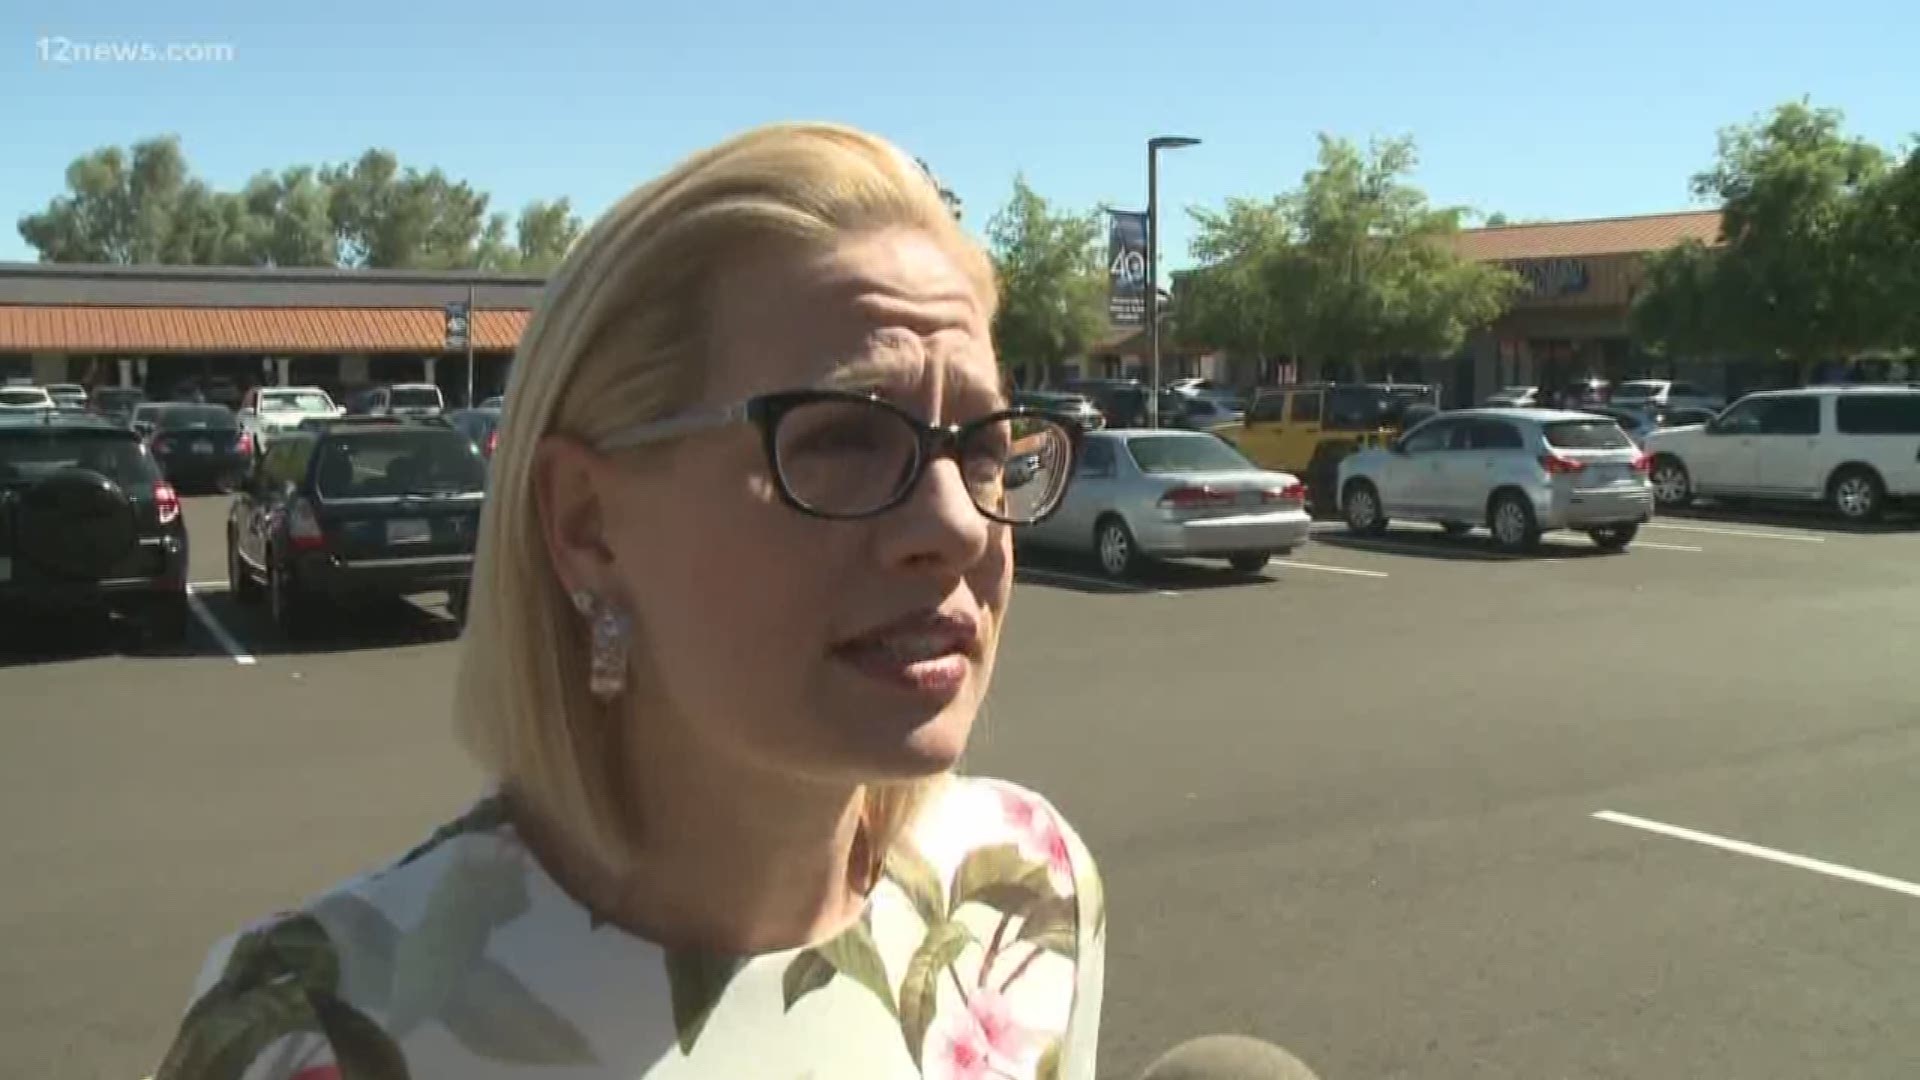 We caught up with Kyrsten Sinema and got her opinion on what is happening at the border. Sinema says the best response to the surge at the border is to speed up processing.